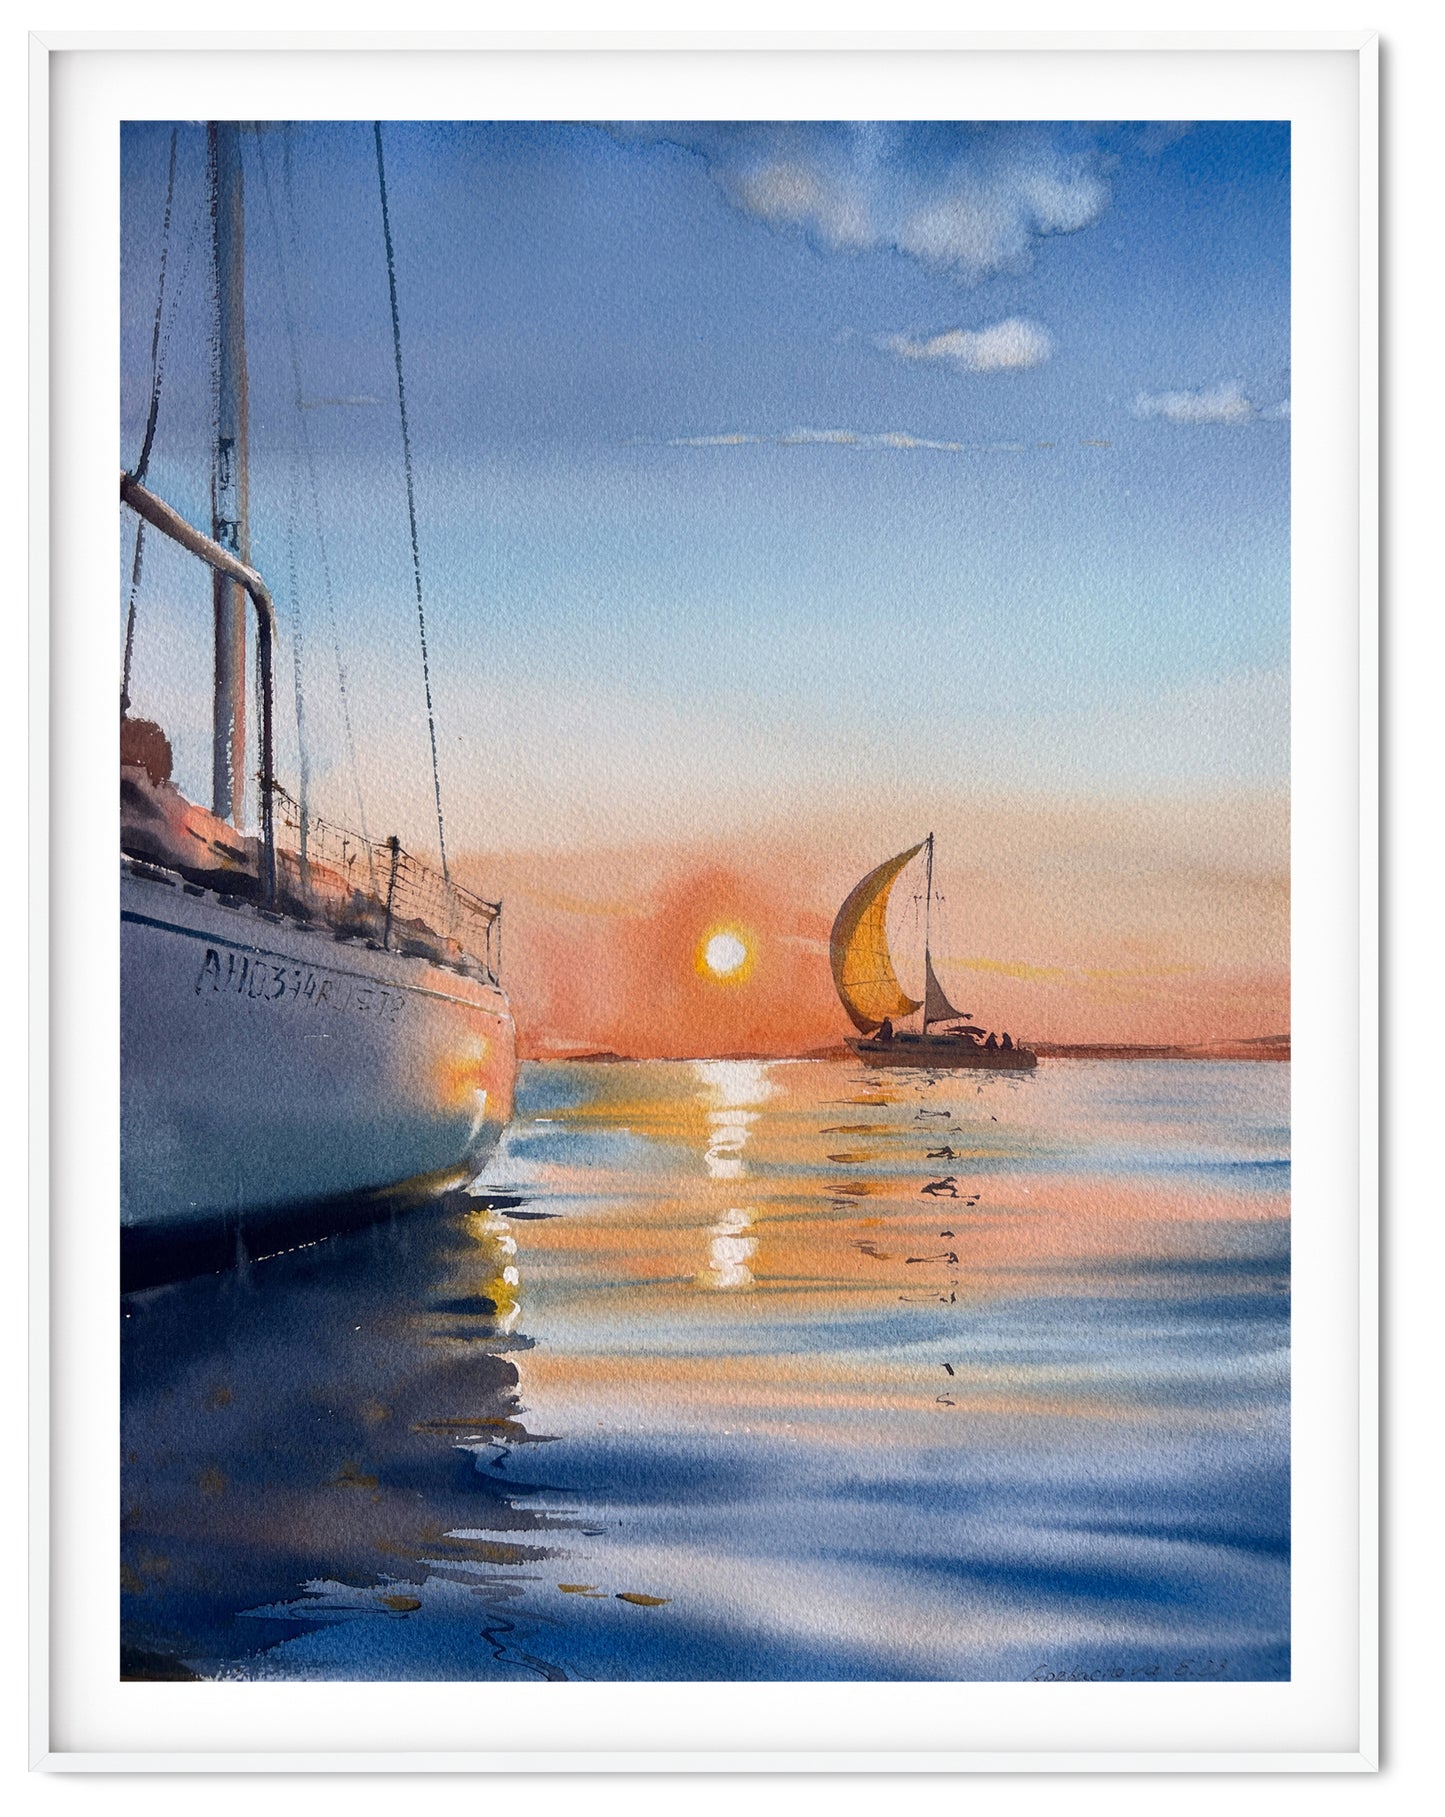 Original Seascape Watercolor Painting, Yacht Art and Sunset - Perfect Coastal Room Wall Decor and Gift for Sea Lovers